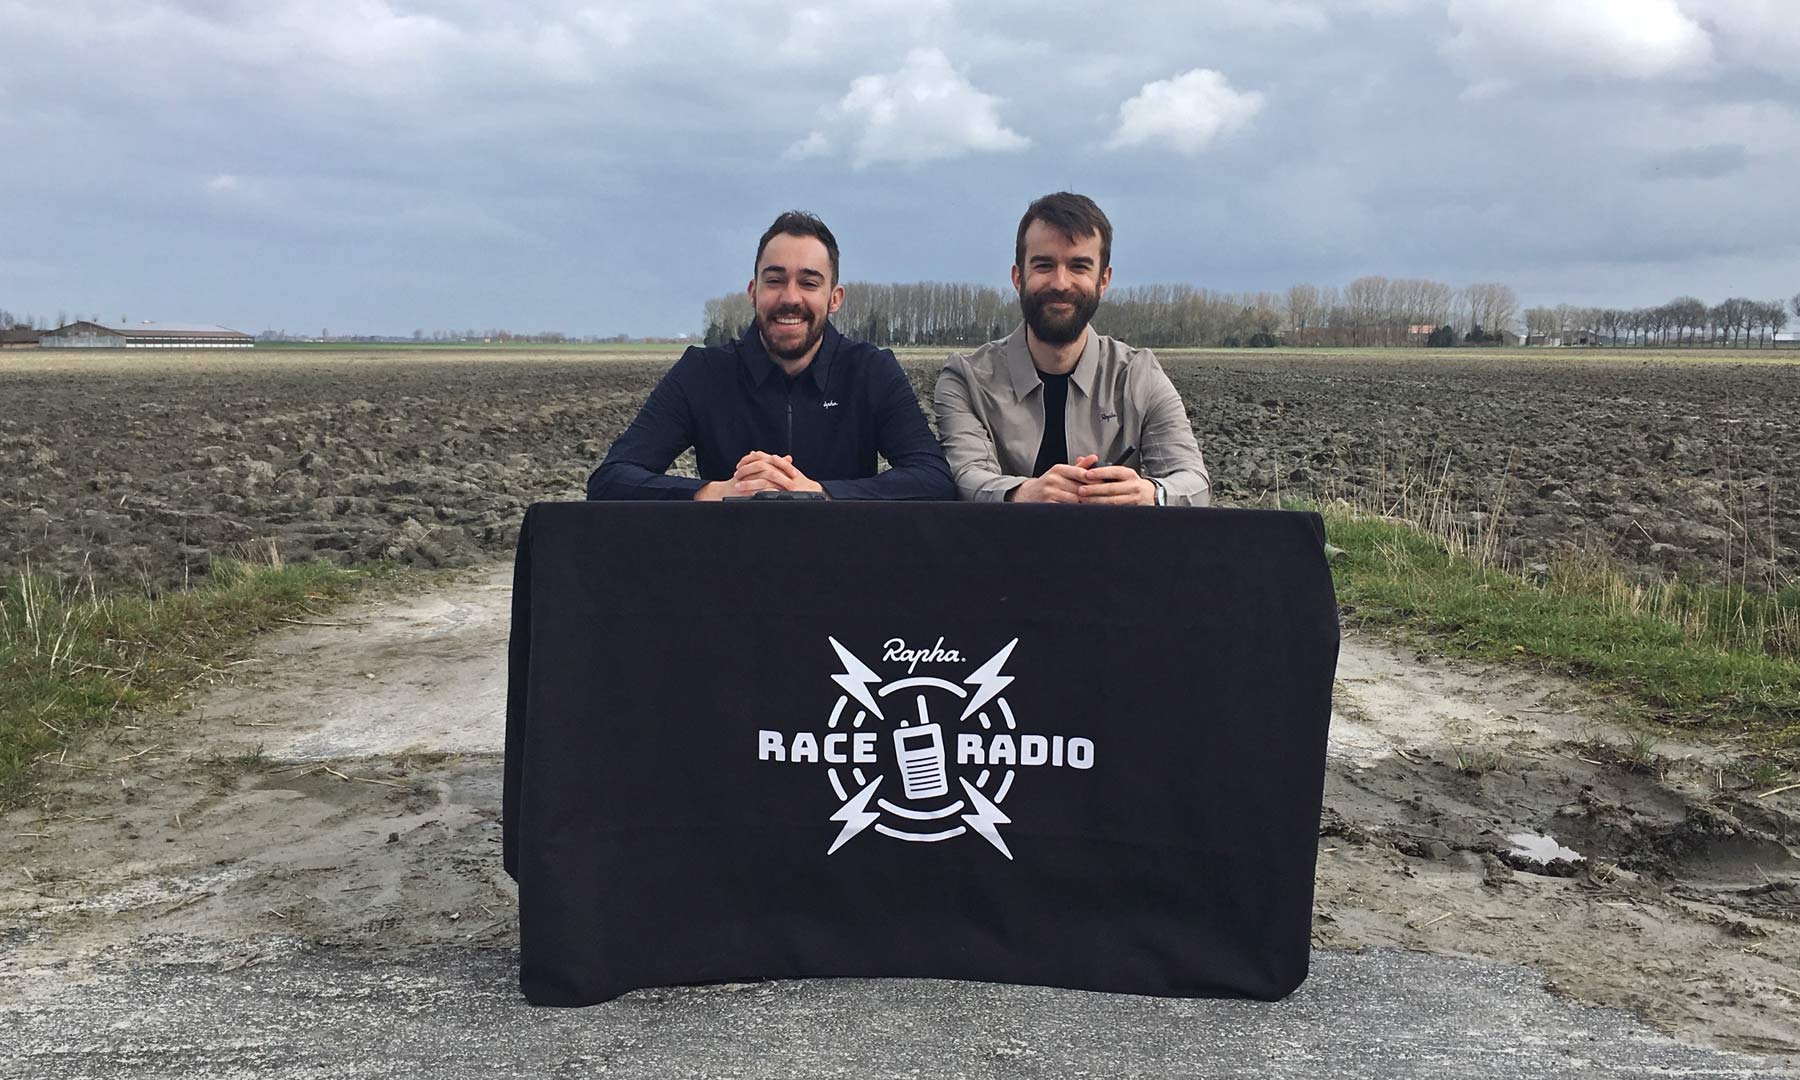 Follow the pros with roadside coverage from Rapha Race Radio